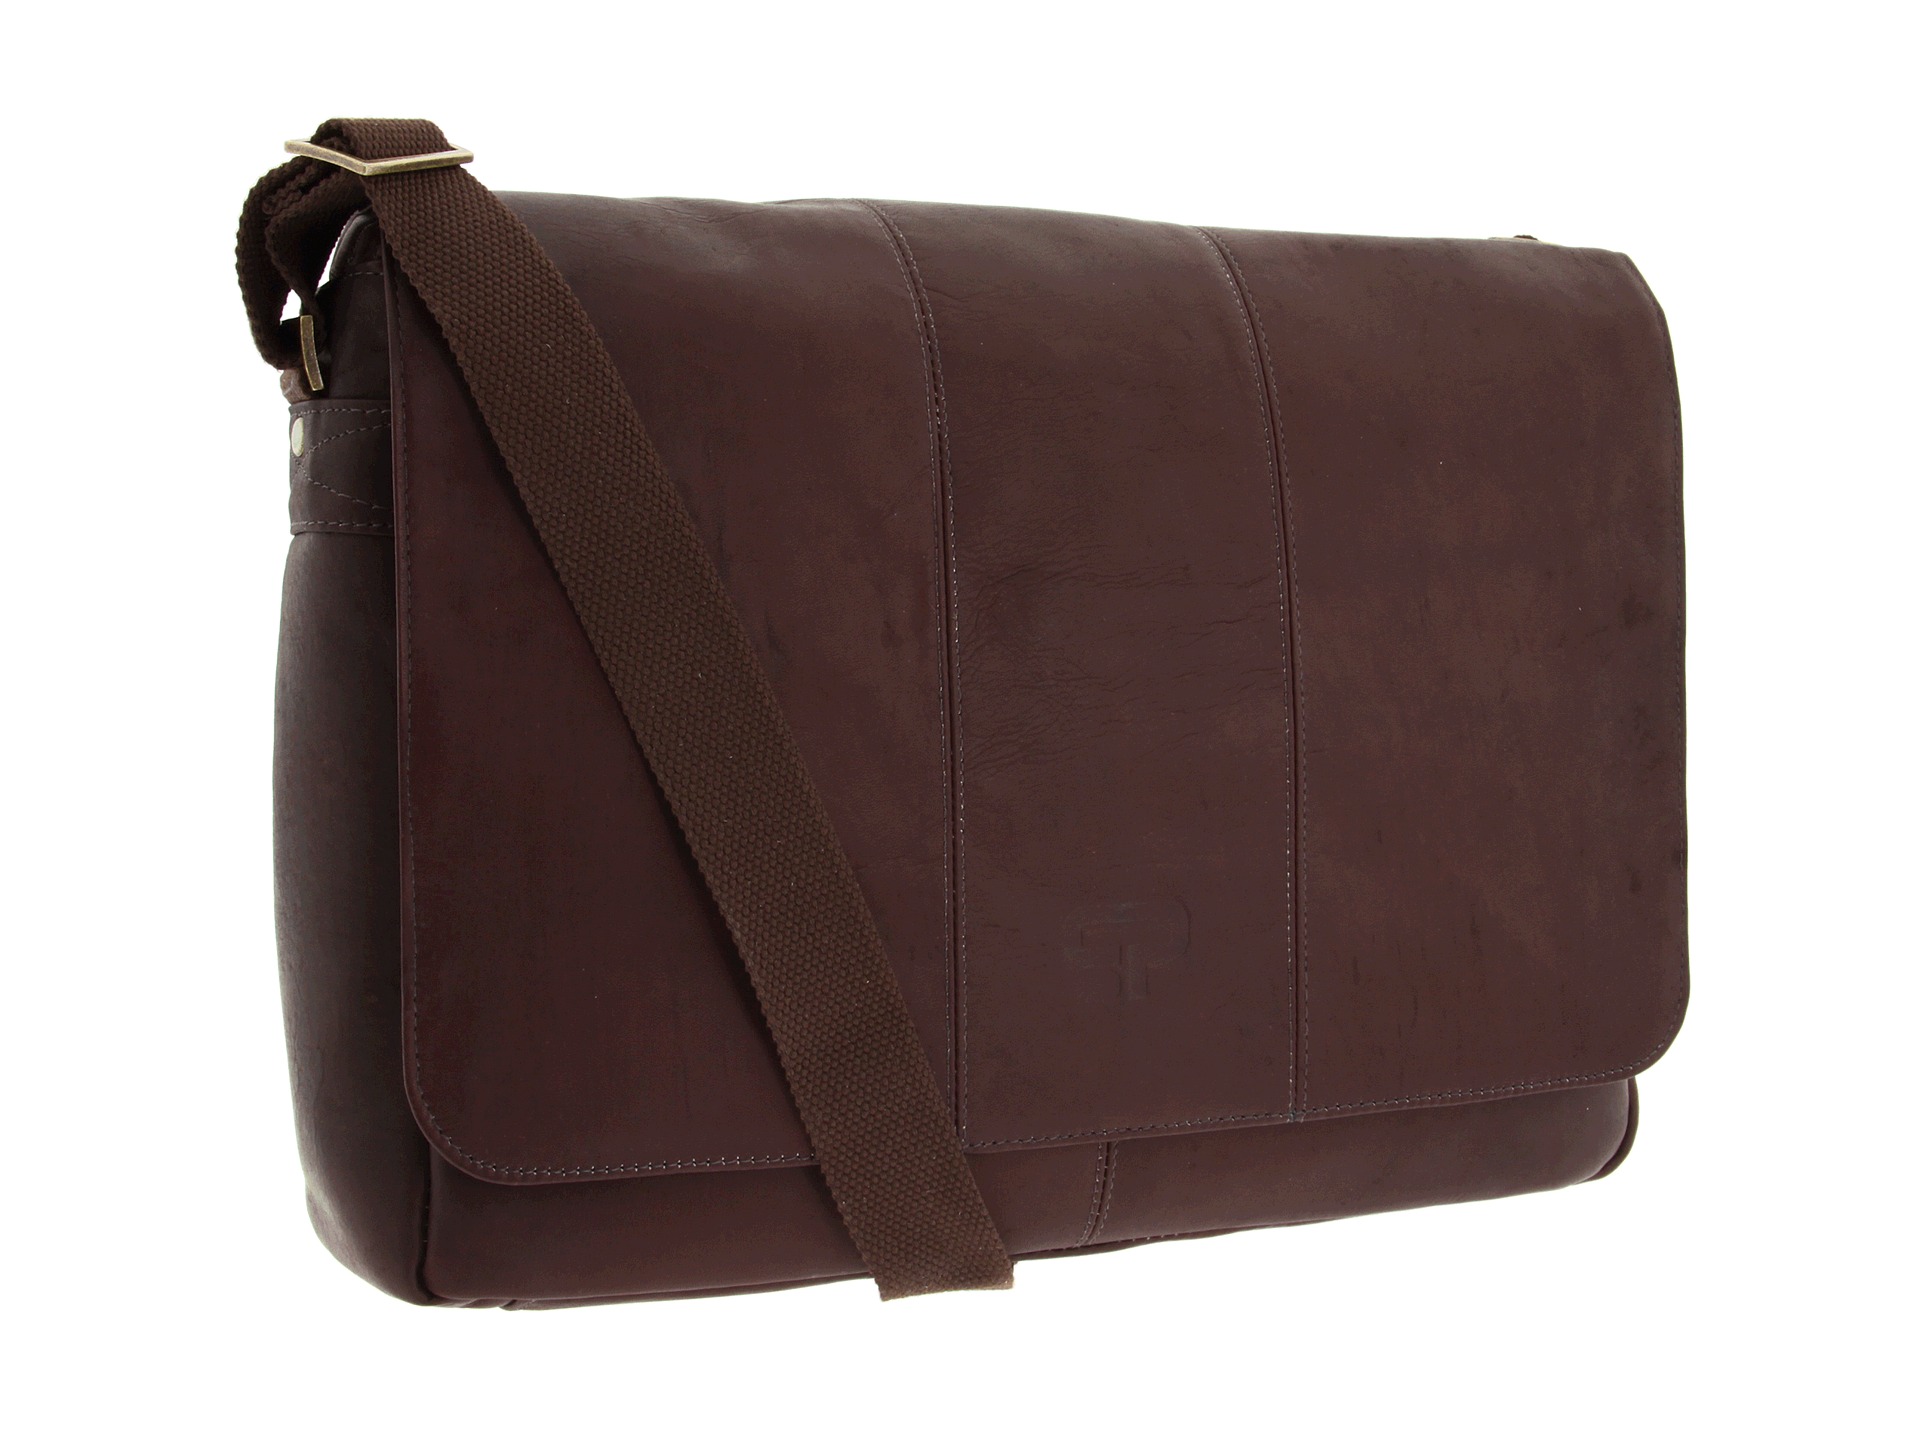 ... Leather Flapover Computer Messenger Bag Brown | Shipped Free at Zappos